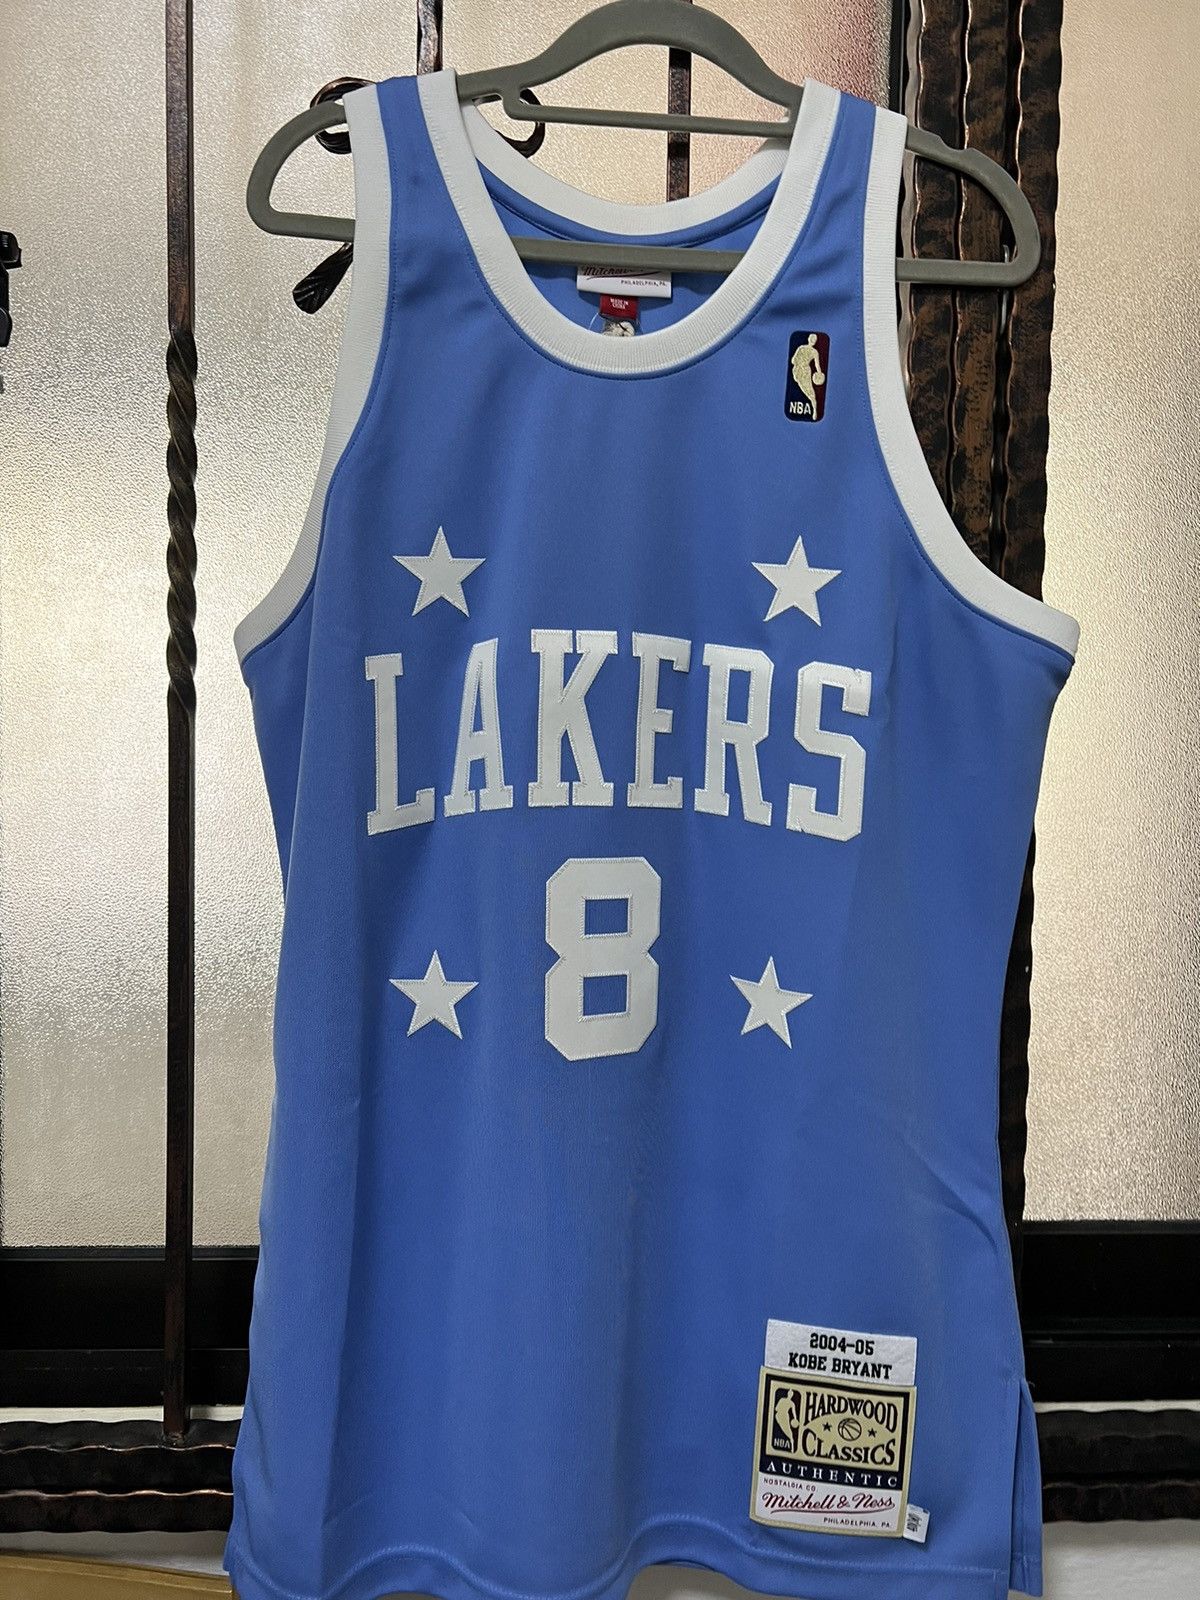 Mitchell & Ness Los Angeles Lakers Kobe Bryant 04'-05' Authentic